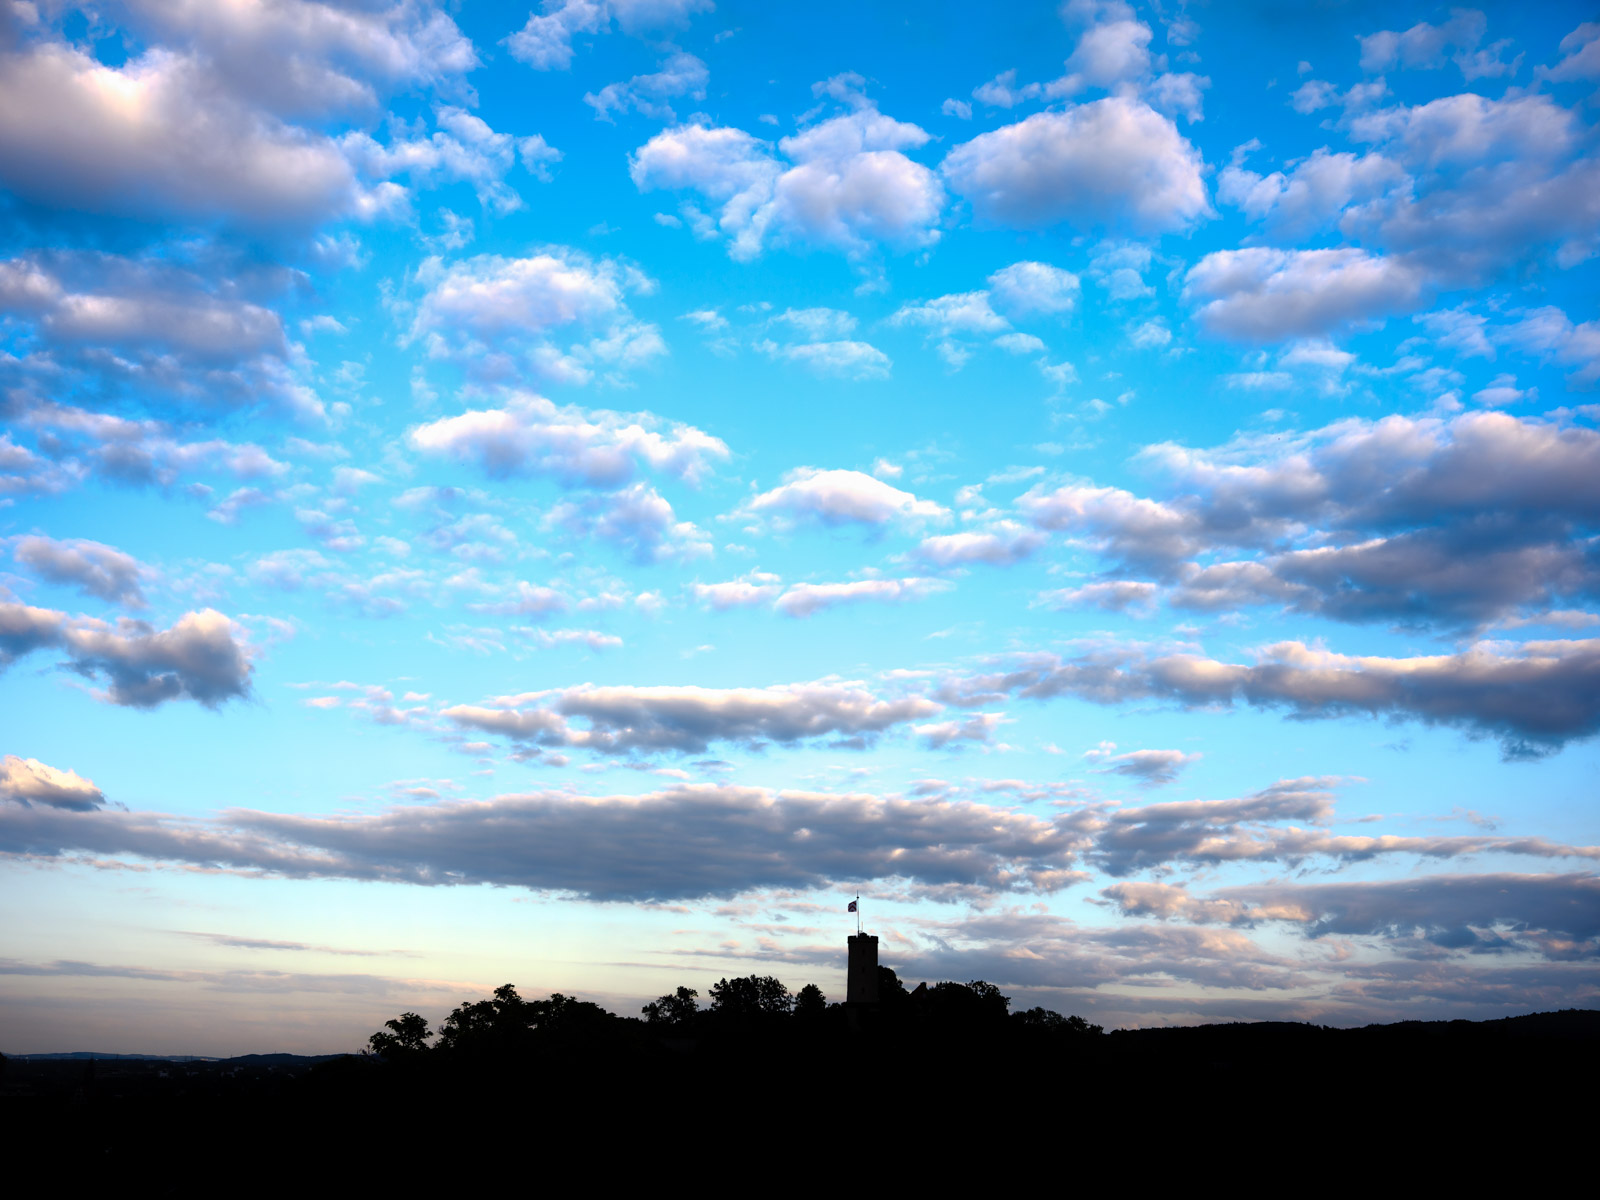 Silhouette with clouds at 'Sparrenburg' castle (Bielefeld, Germany).